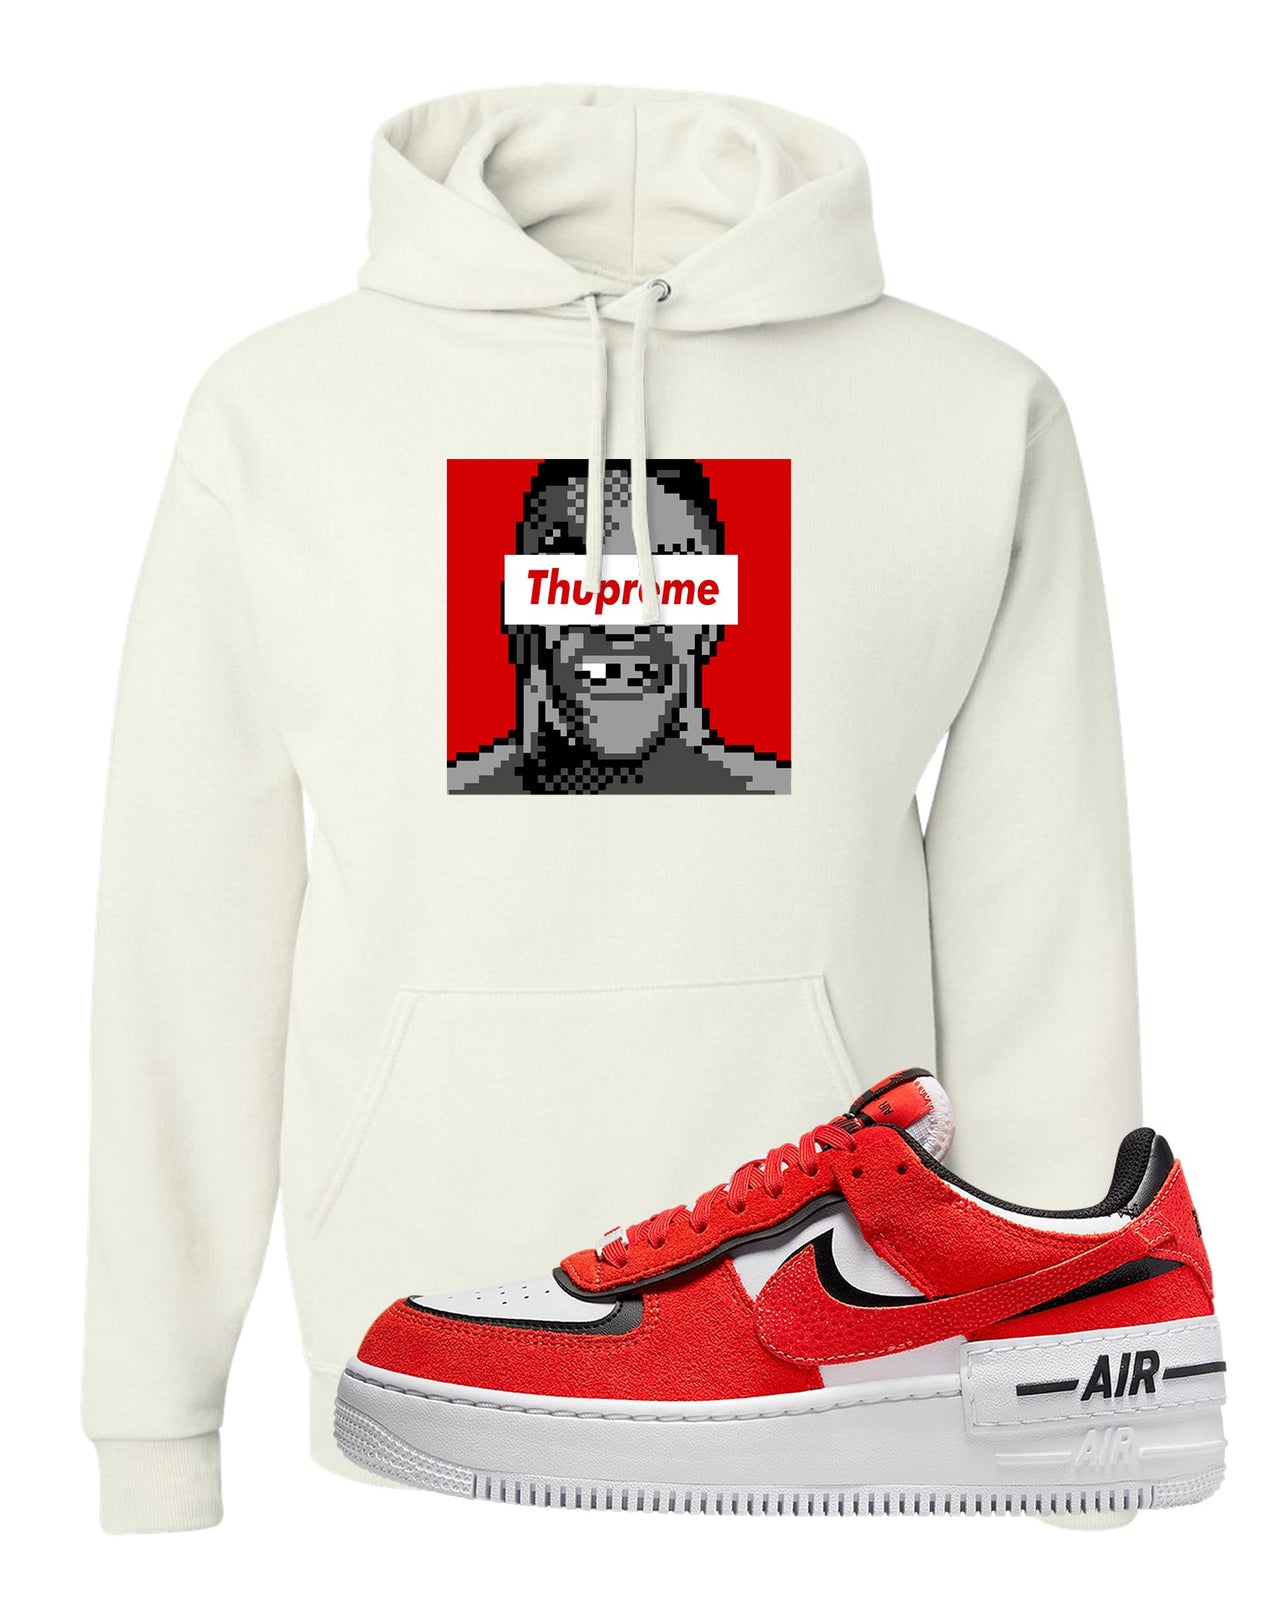 Shadow Chicago AF 1s Hoodie | Thupreme, White